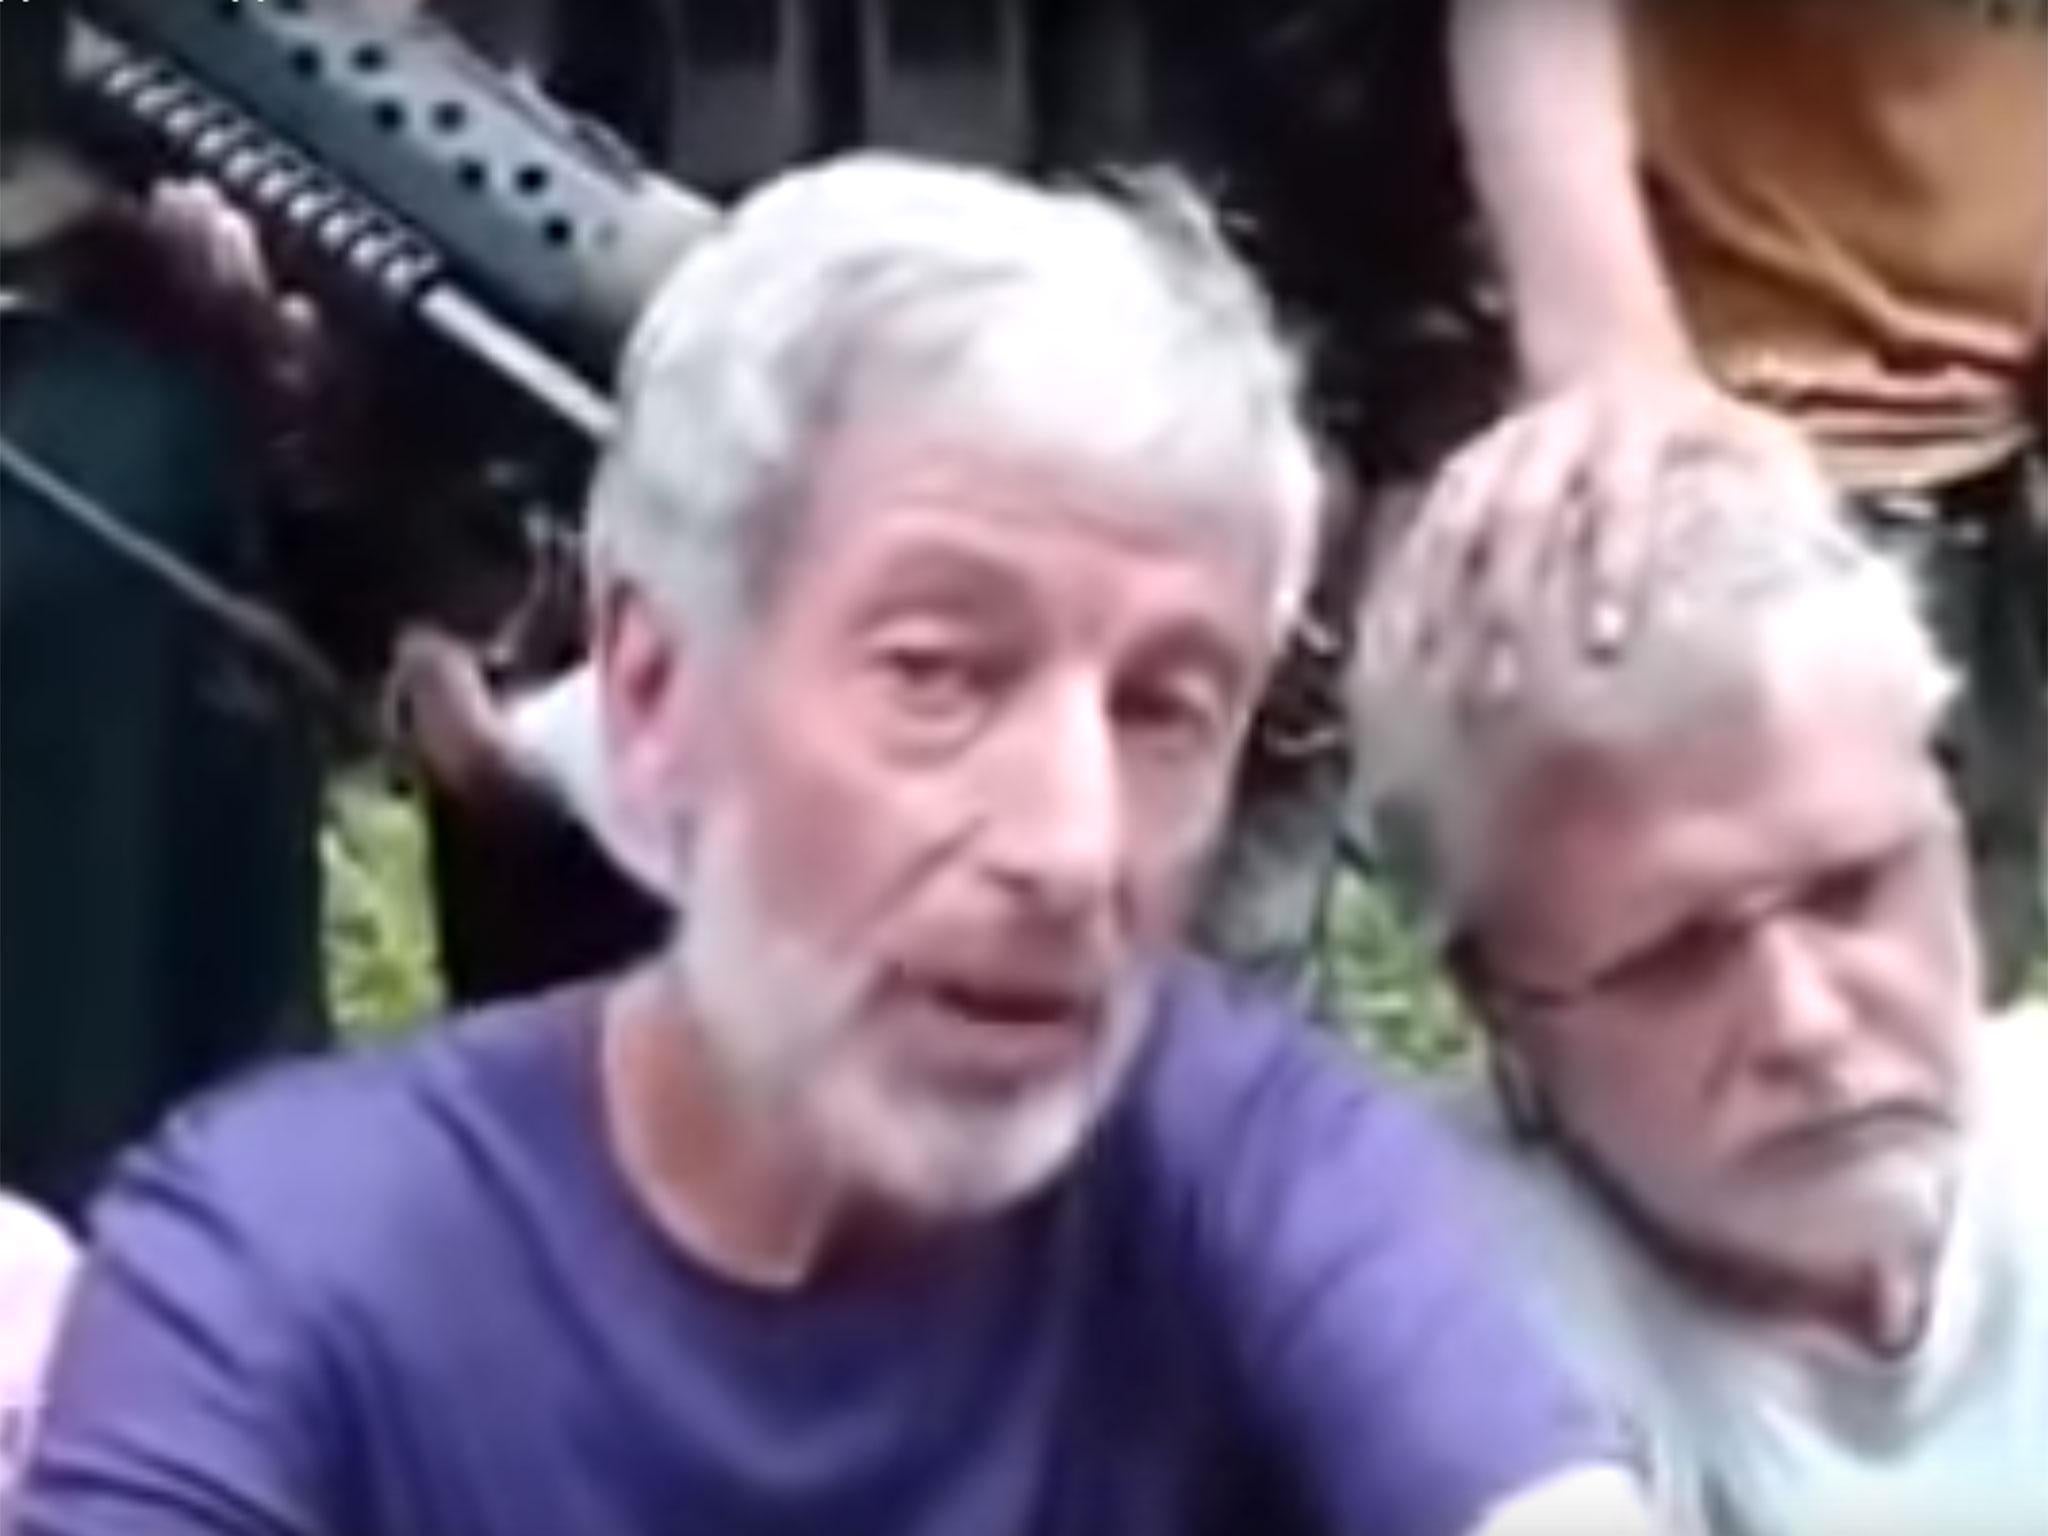 Canadian Robert Hall, left, was captured along with John Ridsdel, who was beheaded by Abu Sayyaf in April